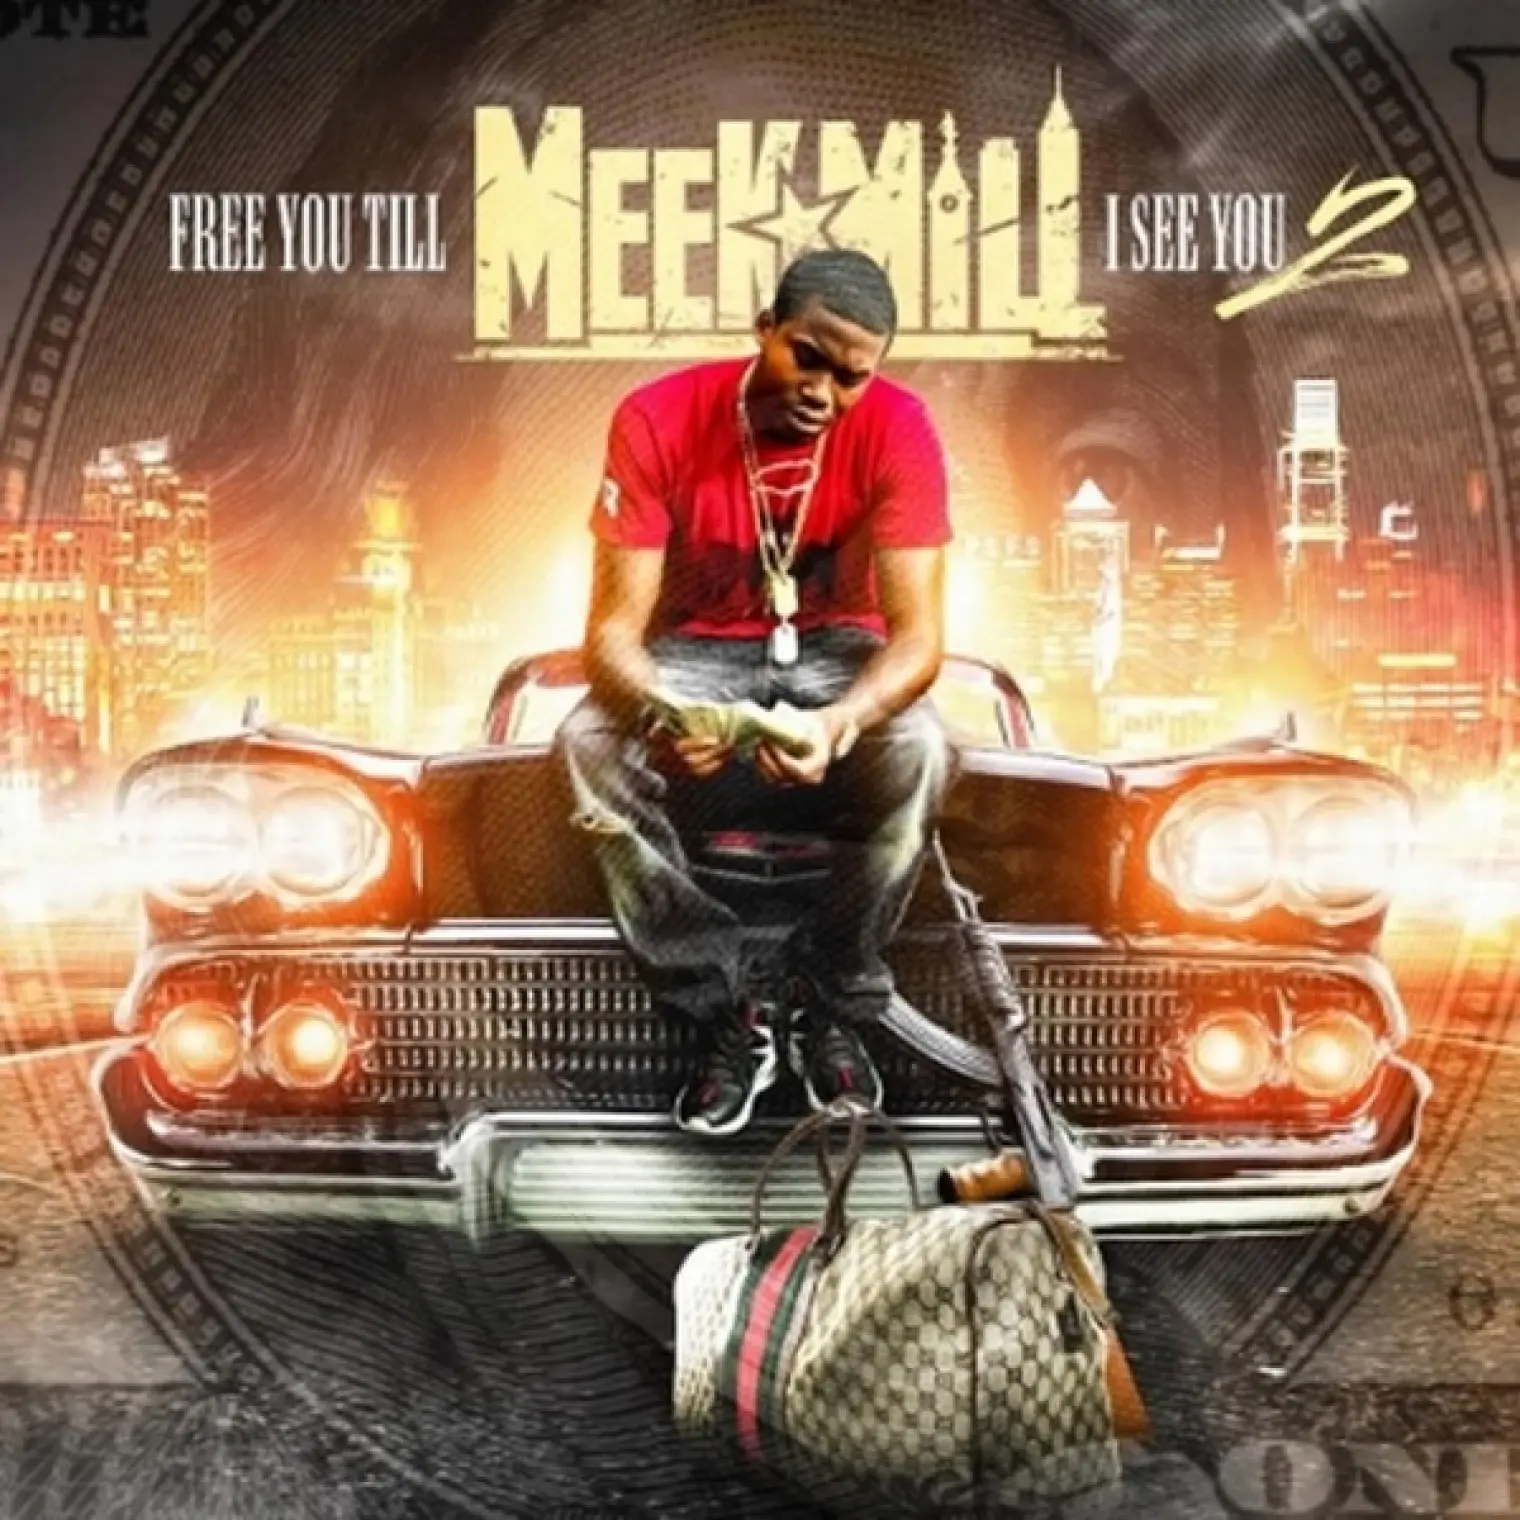 Free You Till I See You, Vol. 2 -  Meek Mill 